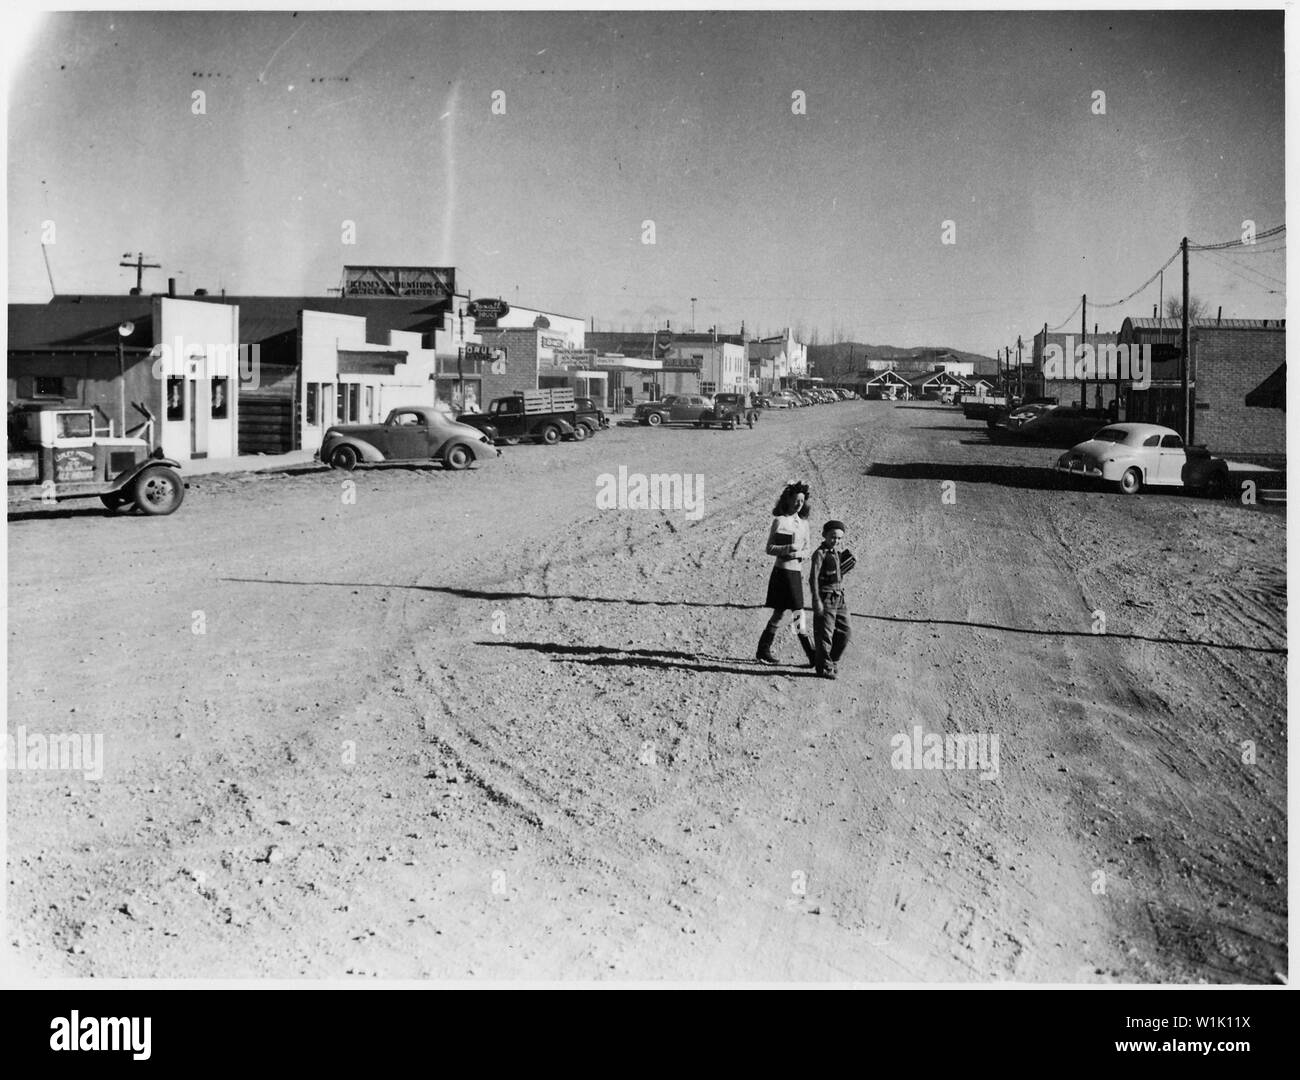 Tule Lake Relocation Center, Newell, California. Looking east on main street of Tule Lake, Californ . . .; Scope and content:  The full caption for this photograph reads: Tule Lake Relocation Center, Newell, California. Looking east on main street of Tule Lake, California. Near this town, in Modoc County, California, south of the Oregon border, will be established a War Relocation Authority center for evacuees of Japanese ancestry. Stock Photo